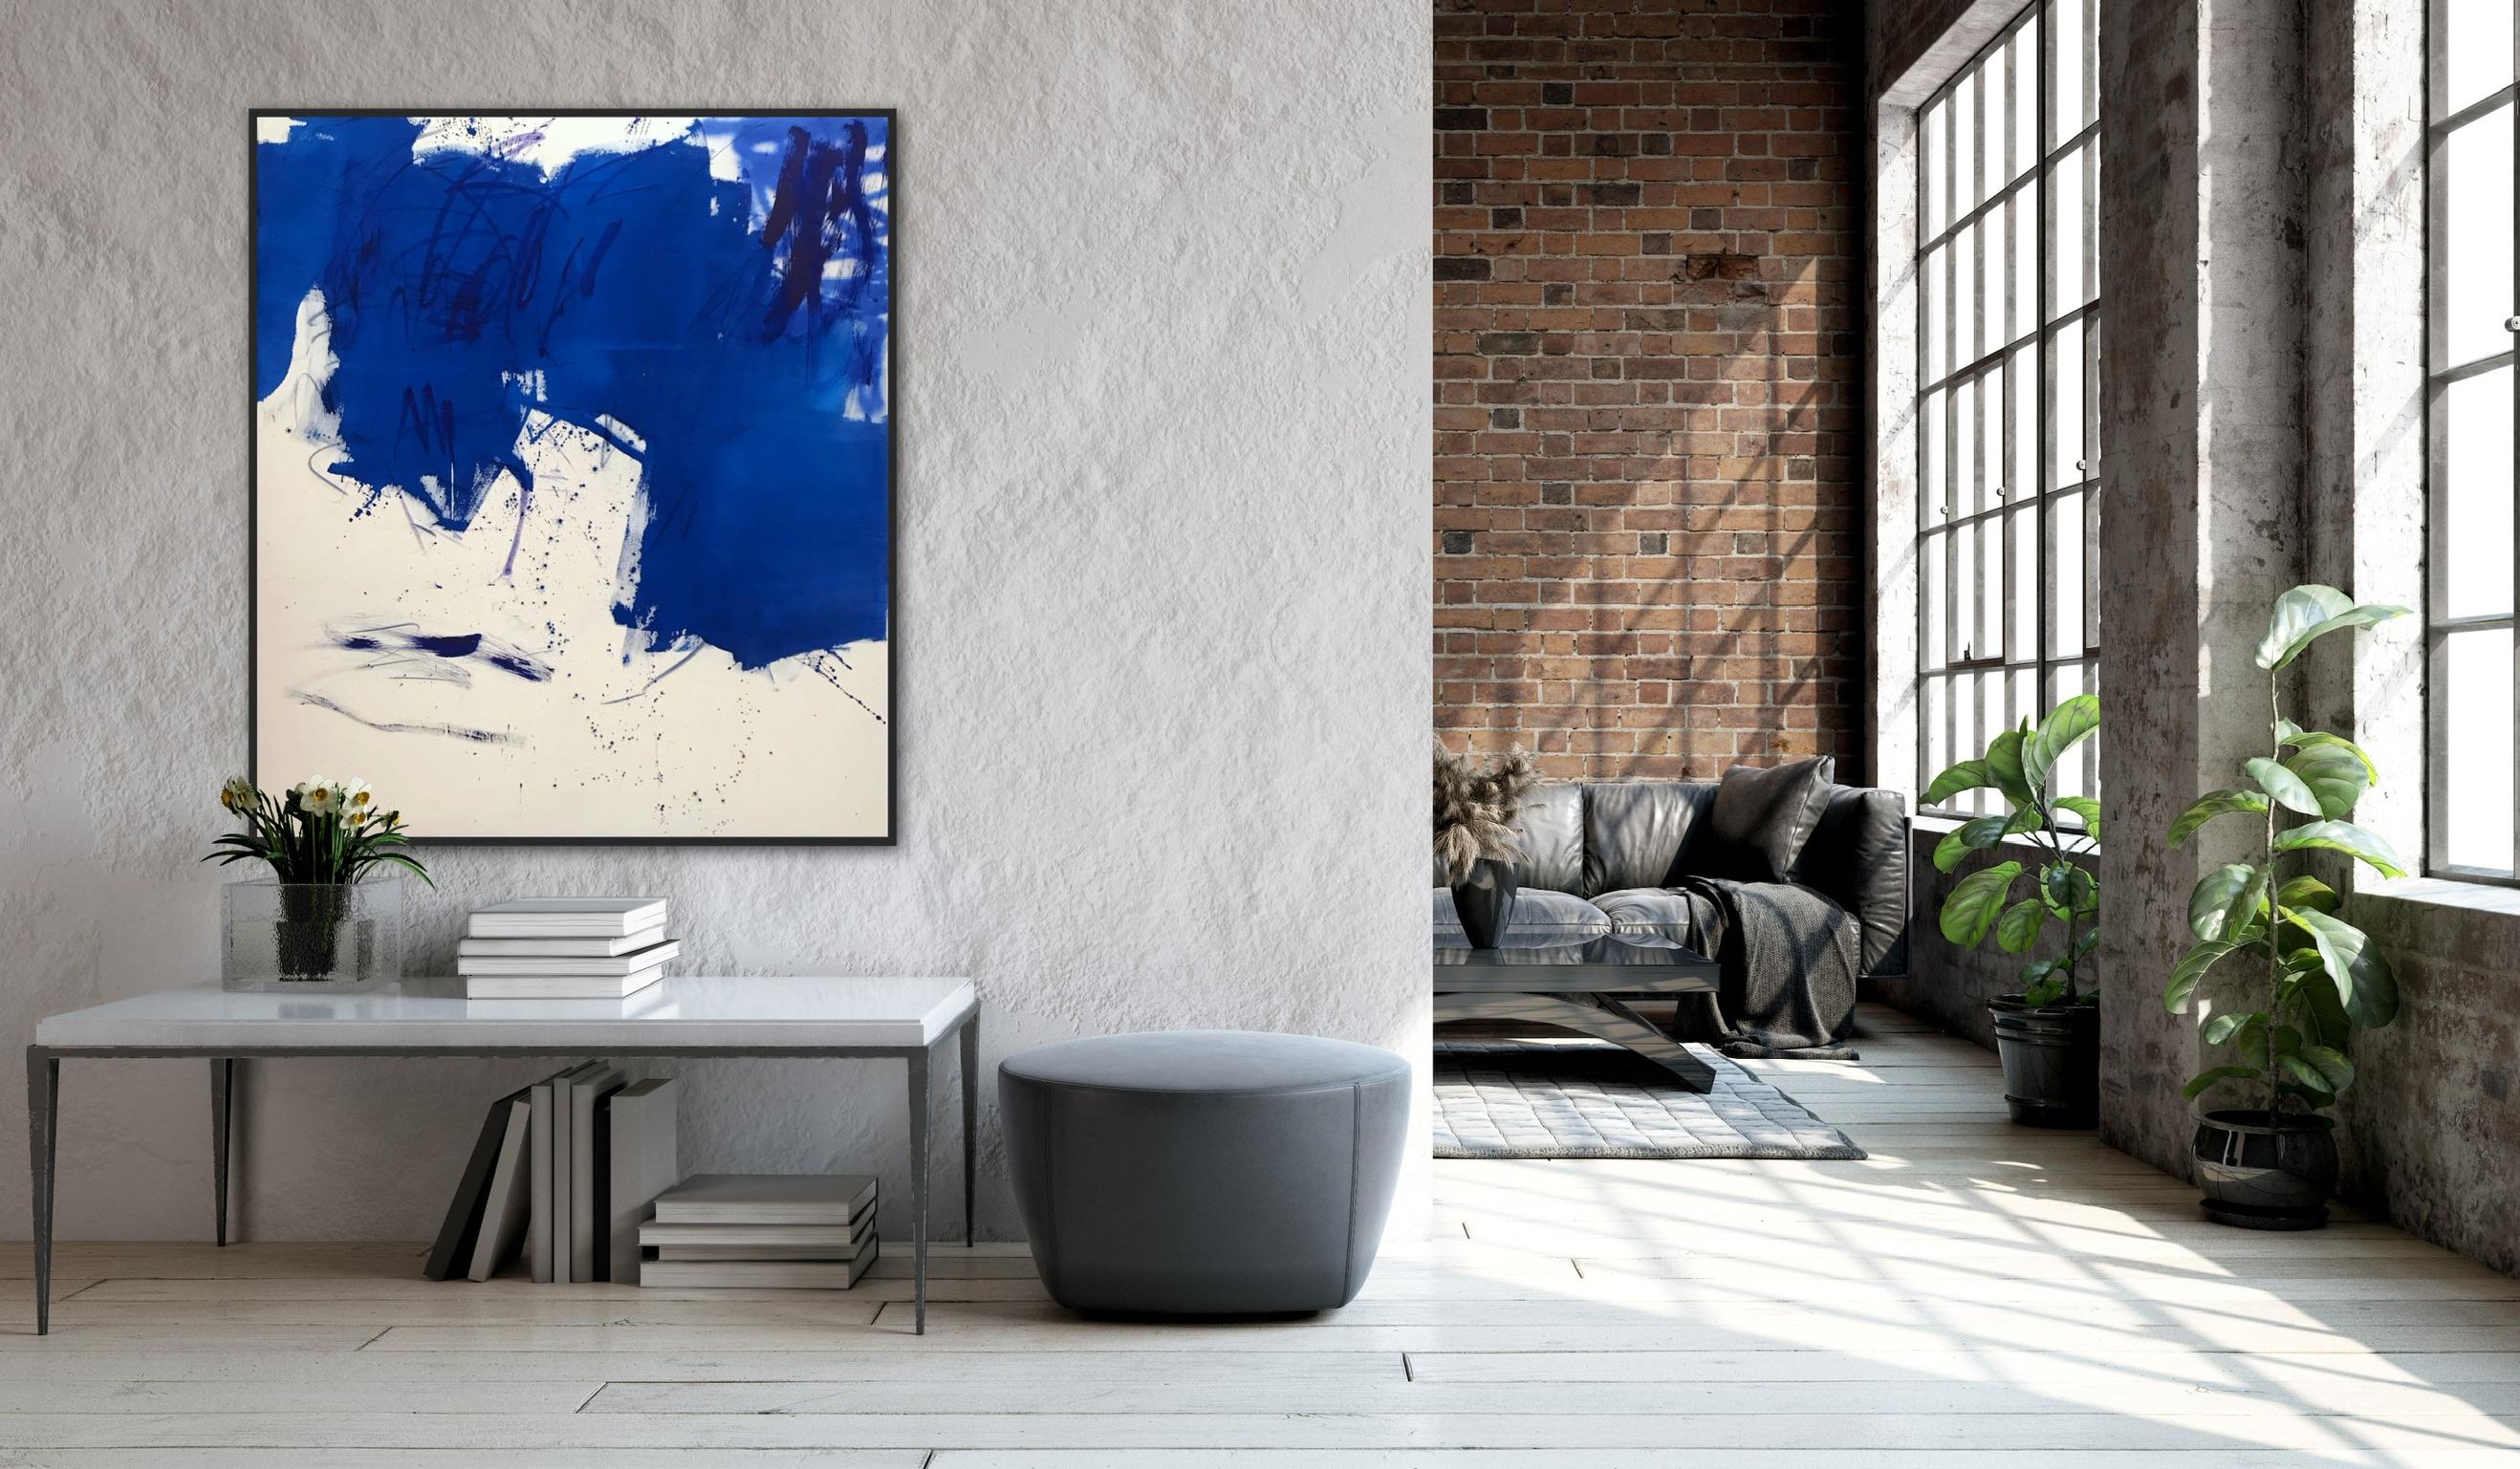 Azur and sea (Abstract painting)

Acrylics, ink, oil on raw canvas.
Artwork is exclusive to IdeelArt.

This artwork will be shipped rolled in a dent-resistant tube.
This method is especially safe for large works and provides lower shipping costs as